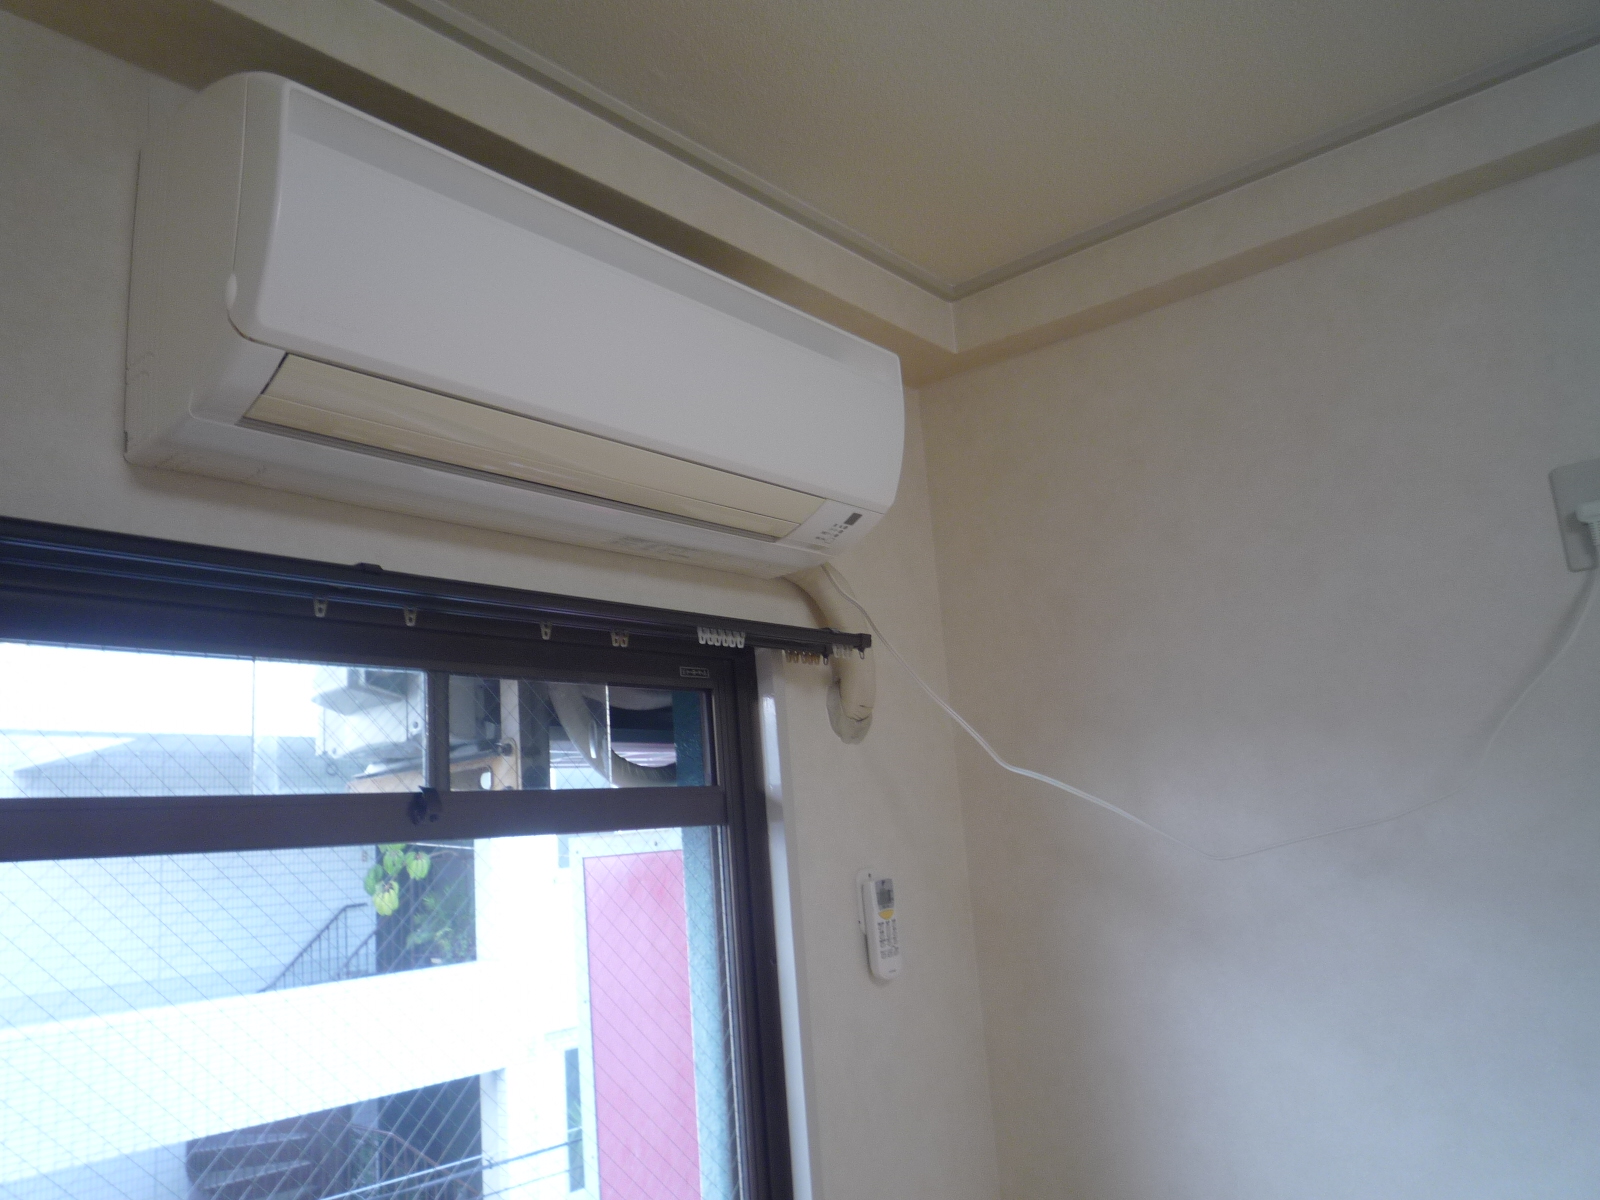 Other Equipment. Air conditioning is a new article!